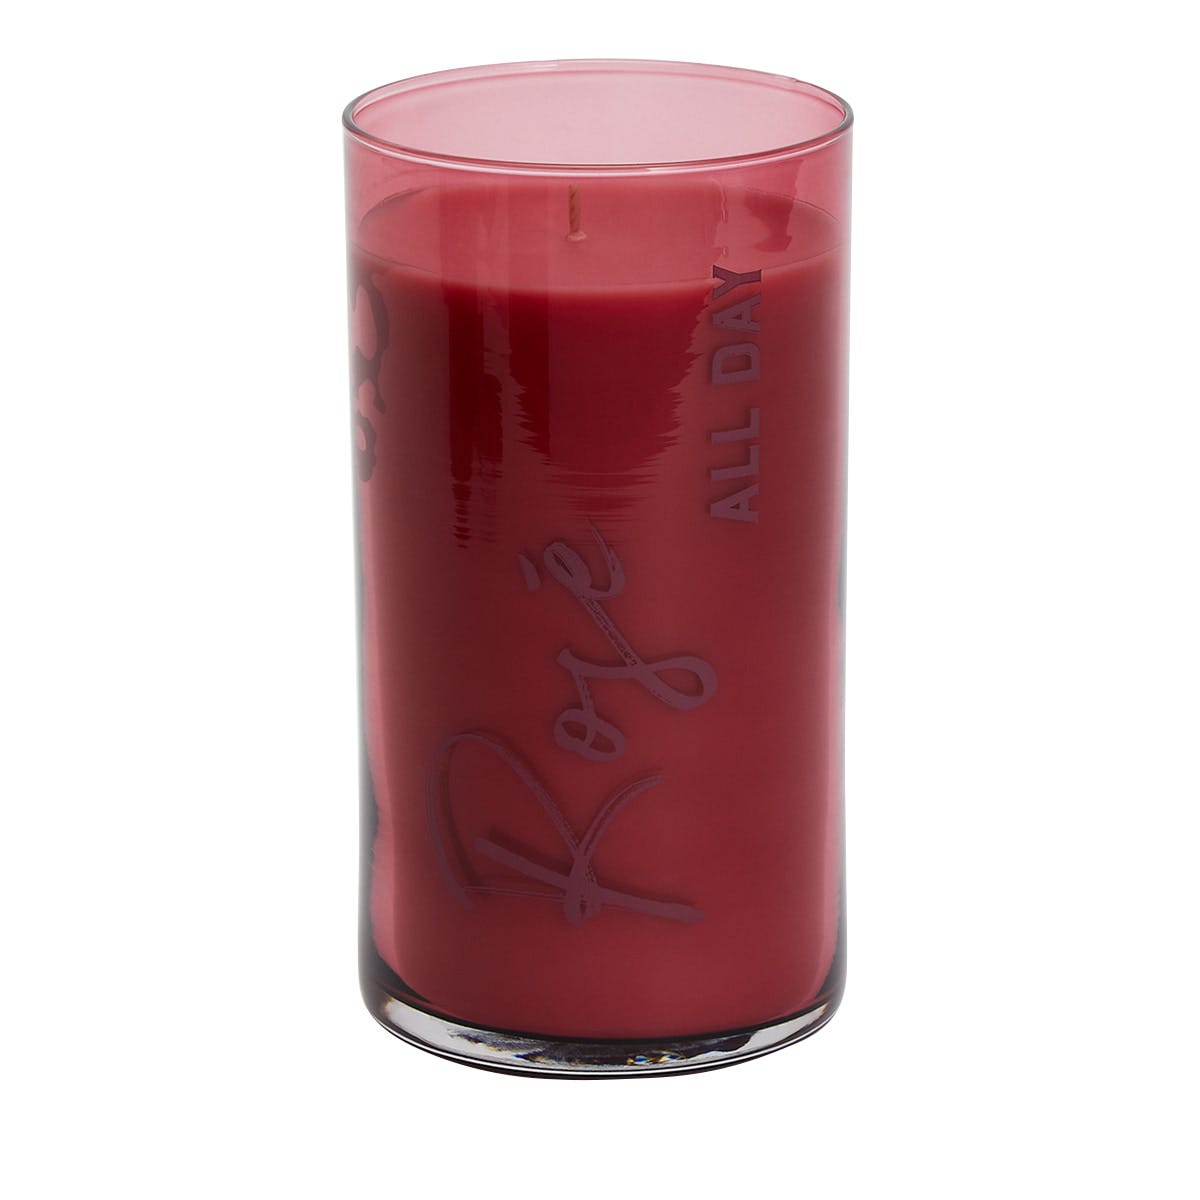 Rosé All Day Jar Candle - PartyLite US